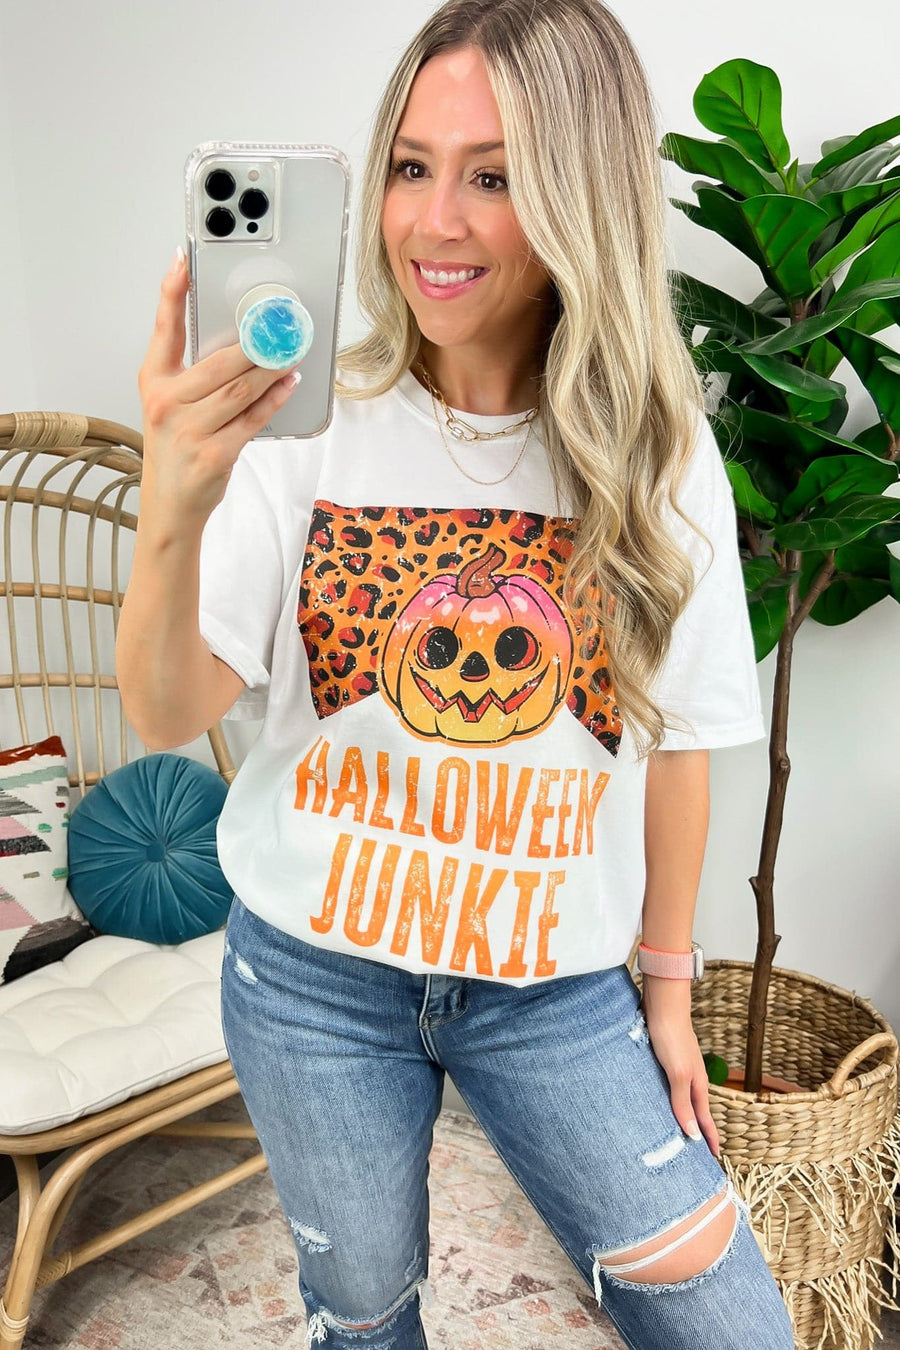  Halloween Junkie Oversized Graphic Tee - FINAL SALE - Madison and Mallory